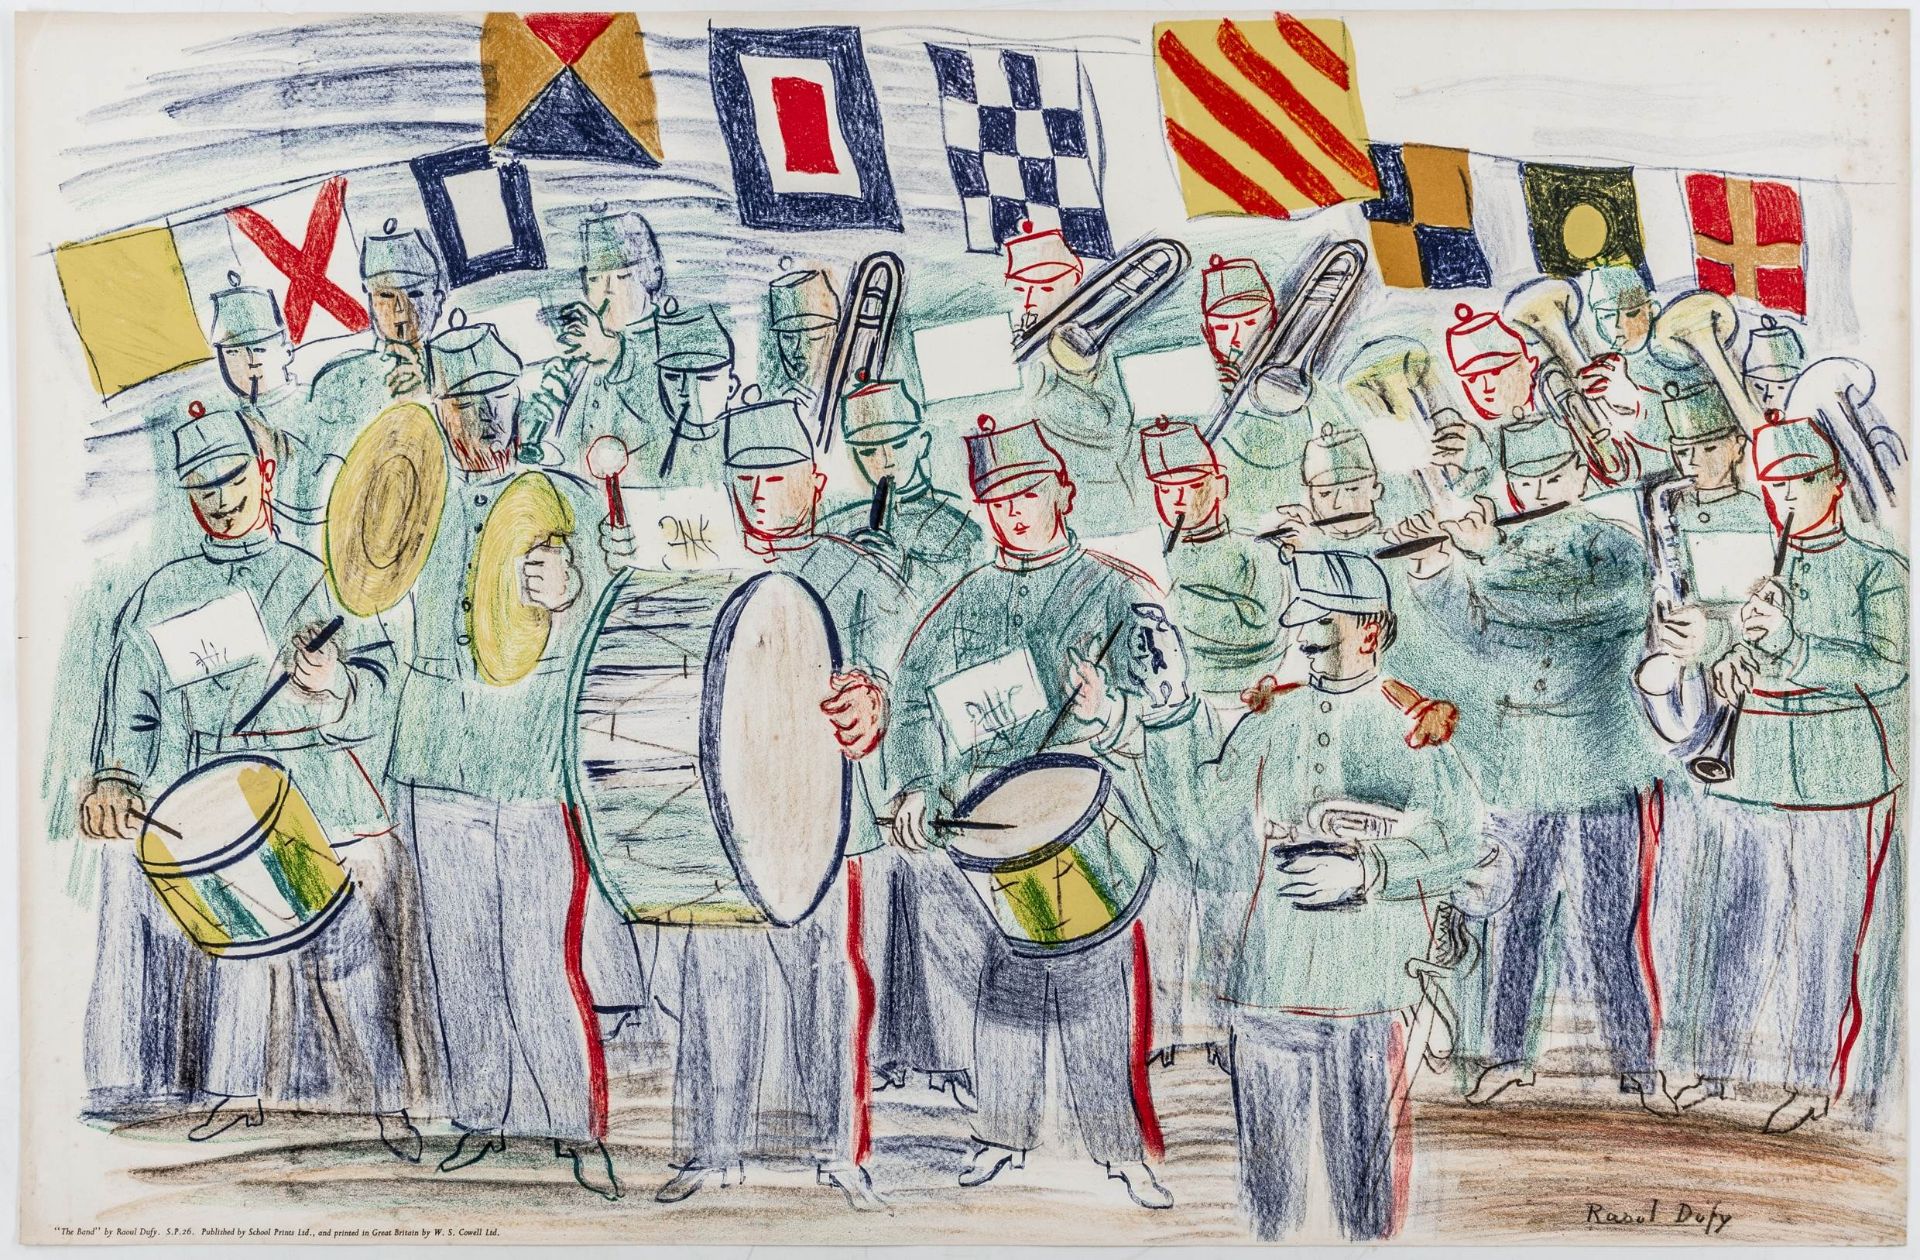 Dufy, Raoul. The Band. - Image 2 of 2